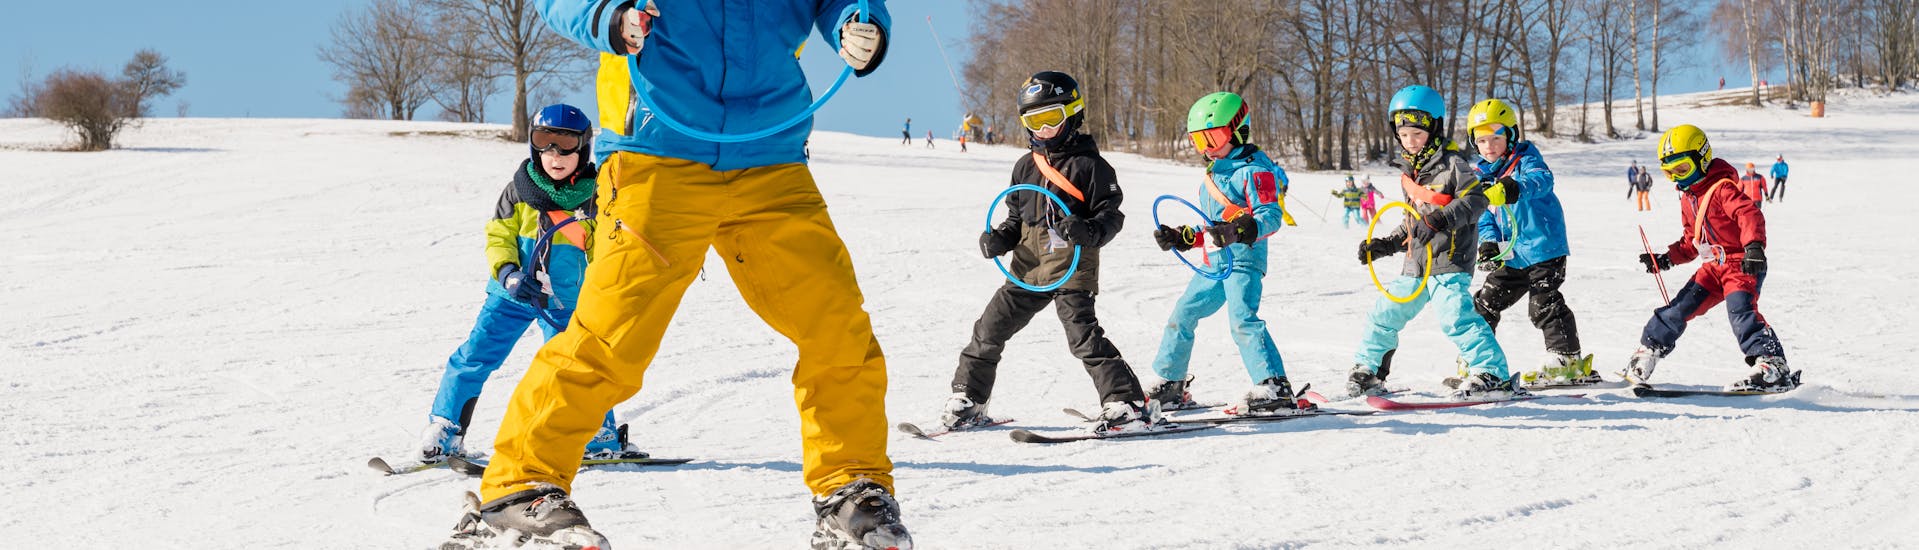 Kids Ski Lessons (5-10 y.) for All Levels.